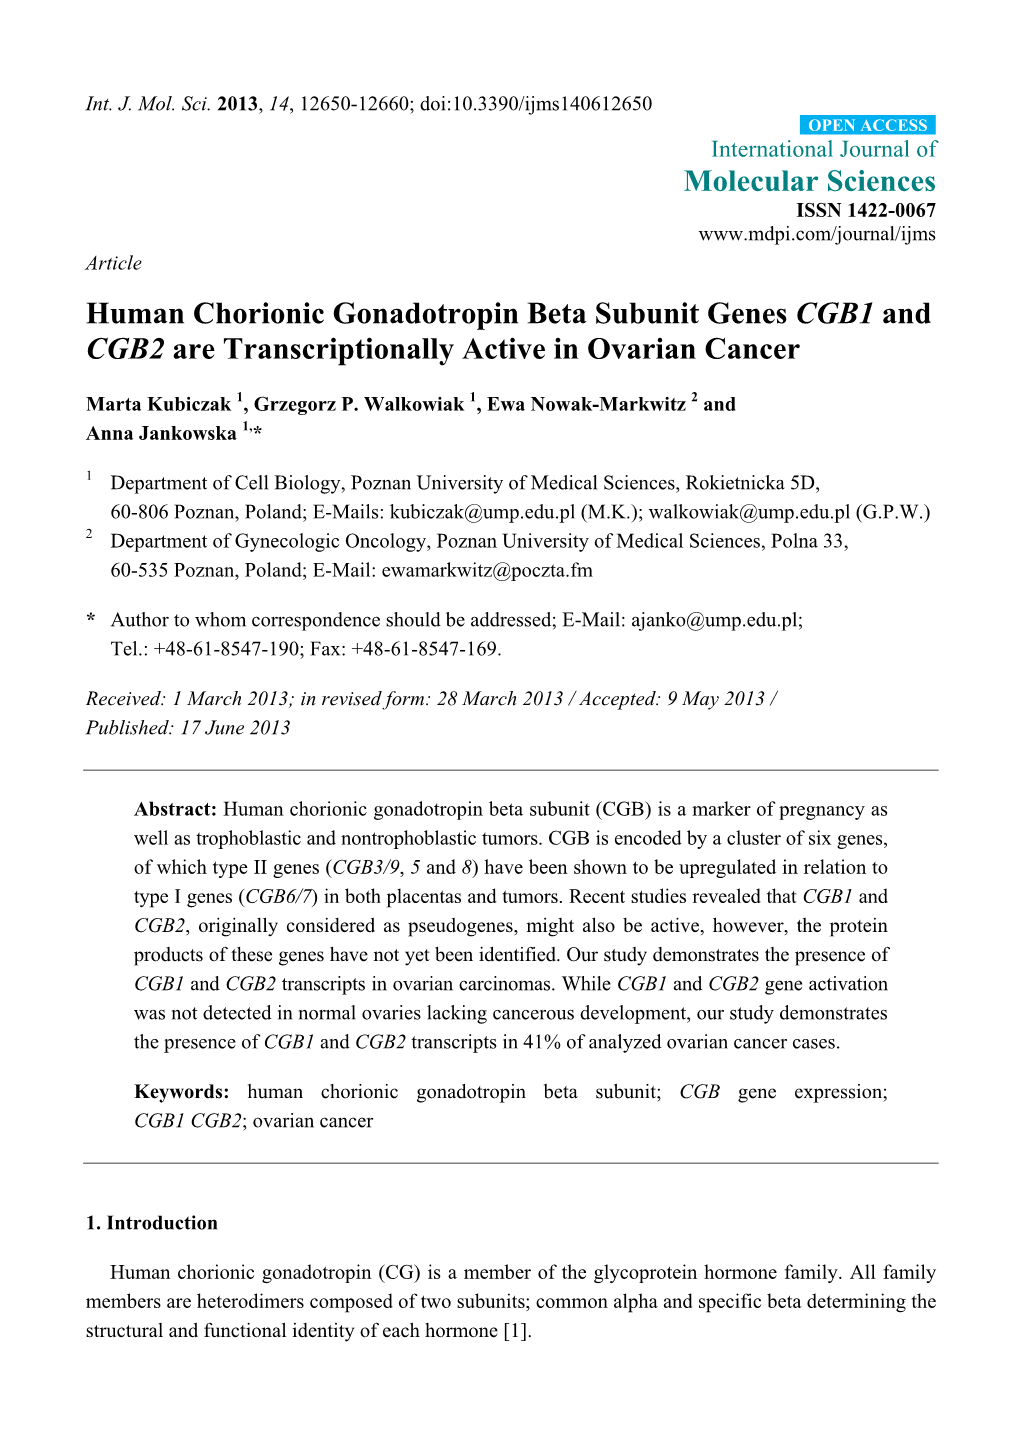 Human Chorionic Gonadotropin Beta Subunit Genes CGB1 and CGB2 Are Transcriptionally Active in Ovarian Cancer